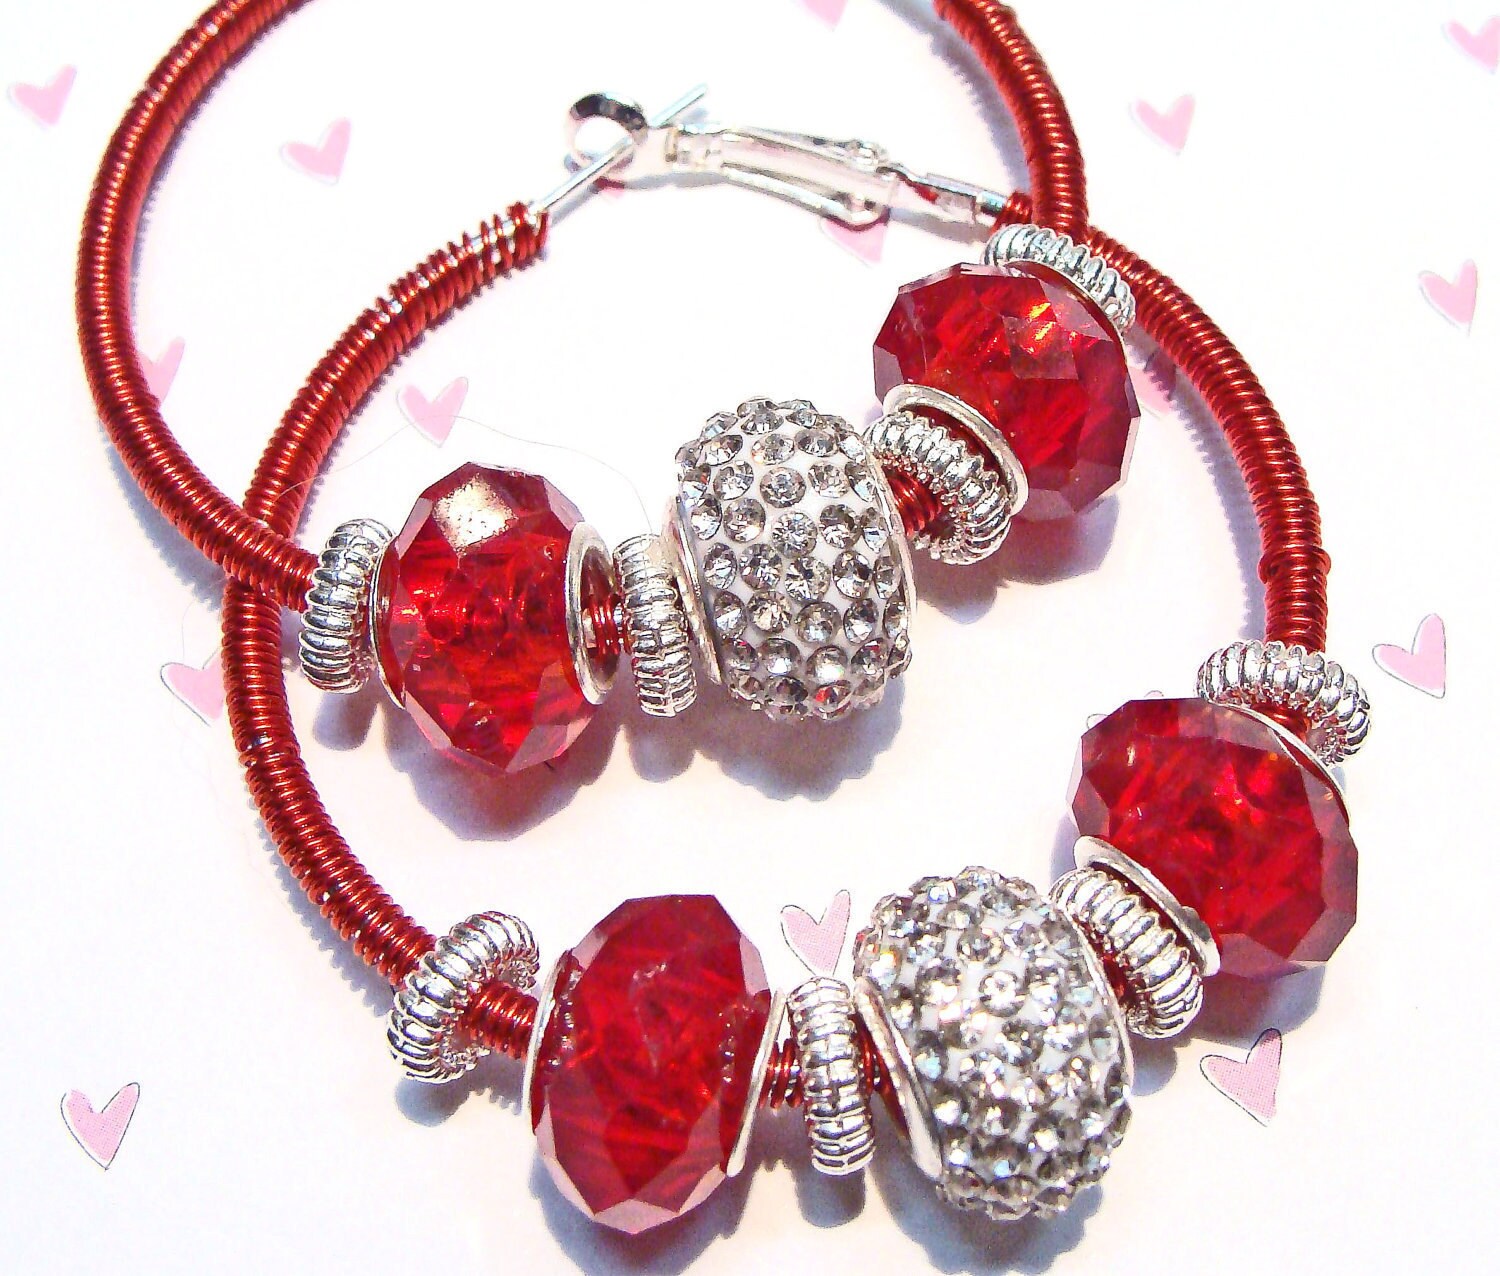  Hoop Earrings on Red Wire Wrapped Hoop Earrings With Crystals And European Large Hole